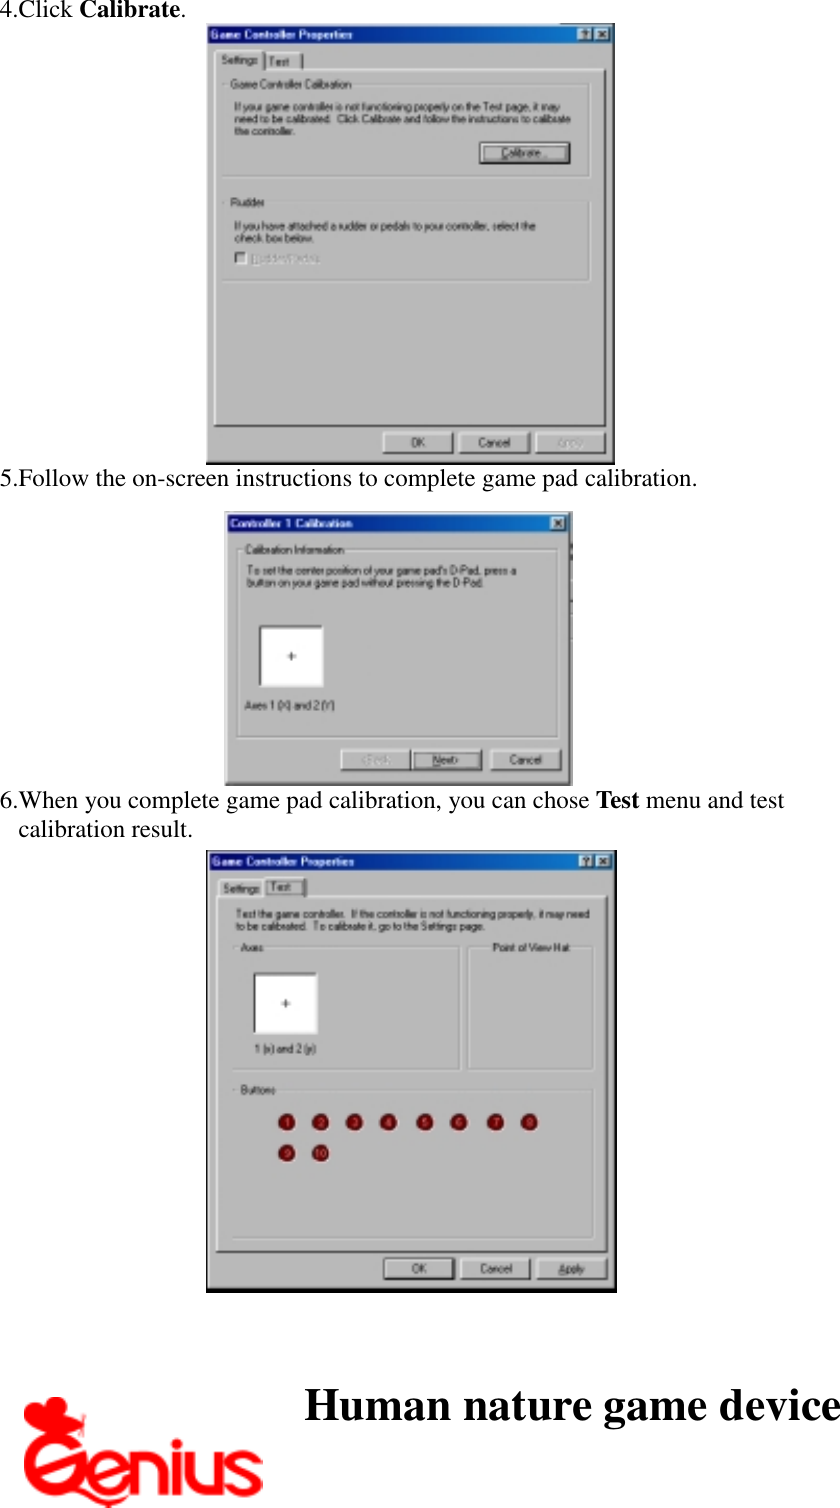 4. Click Calibrate.5. Follow the on-screen instructions to complete game pad calibration.6. When you complete game pad calibration, you can chose Test menu and testcalibration result.Human nature game device